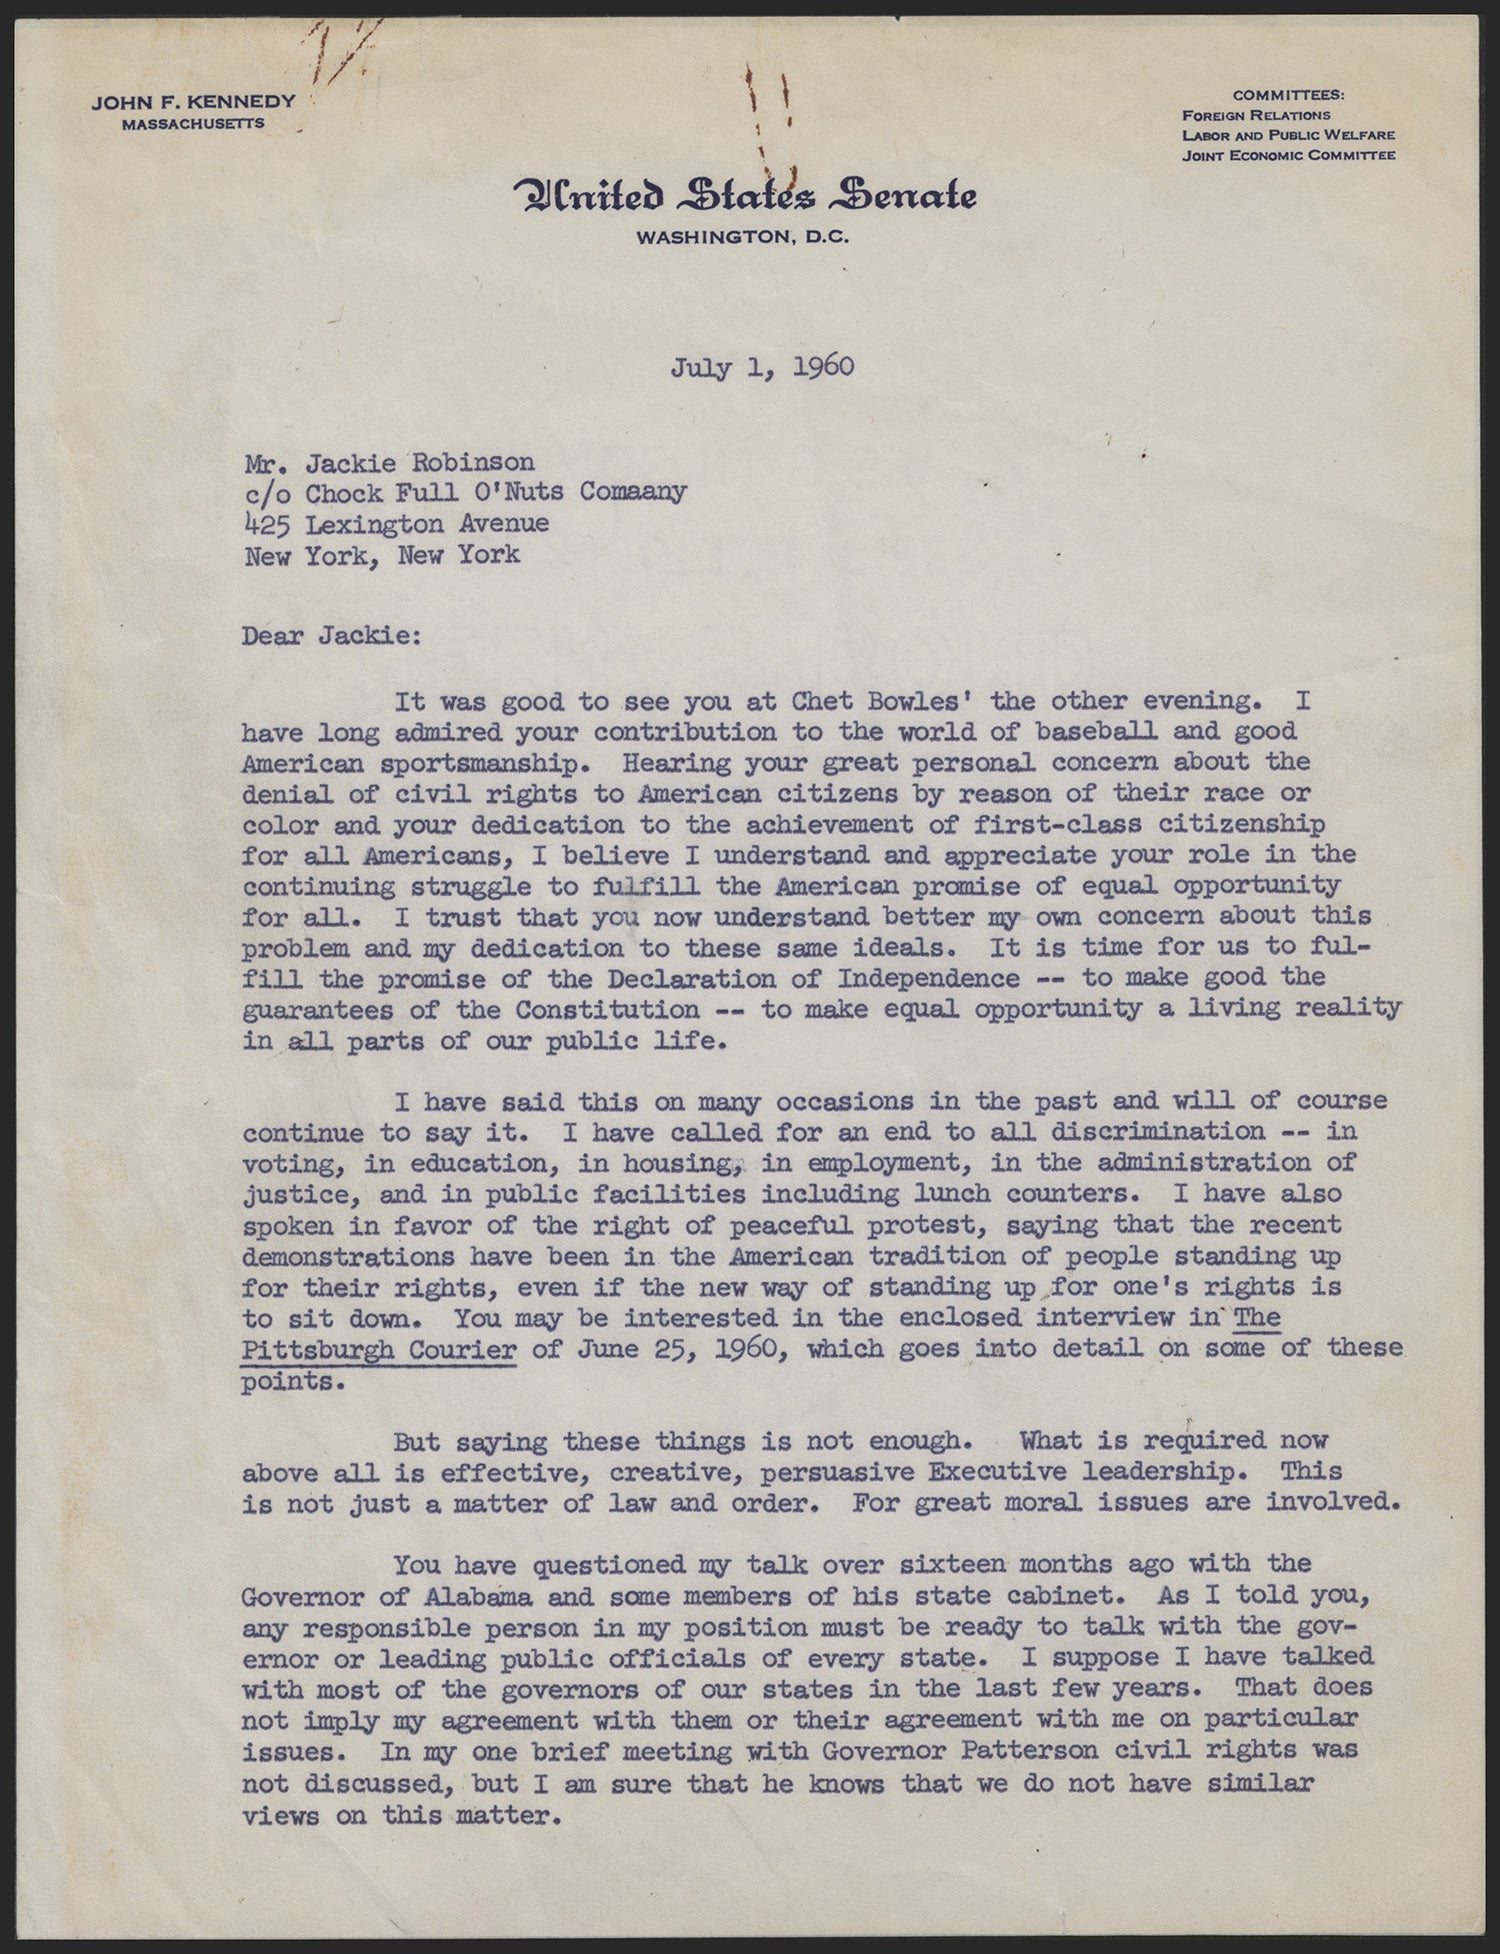 JFK’s letter to Jackie Robinson